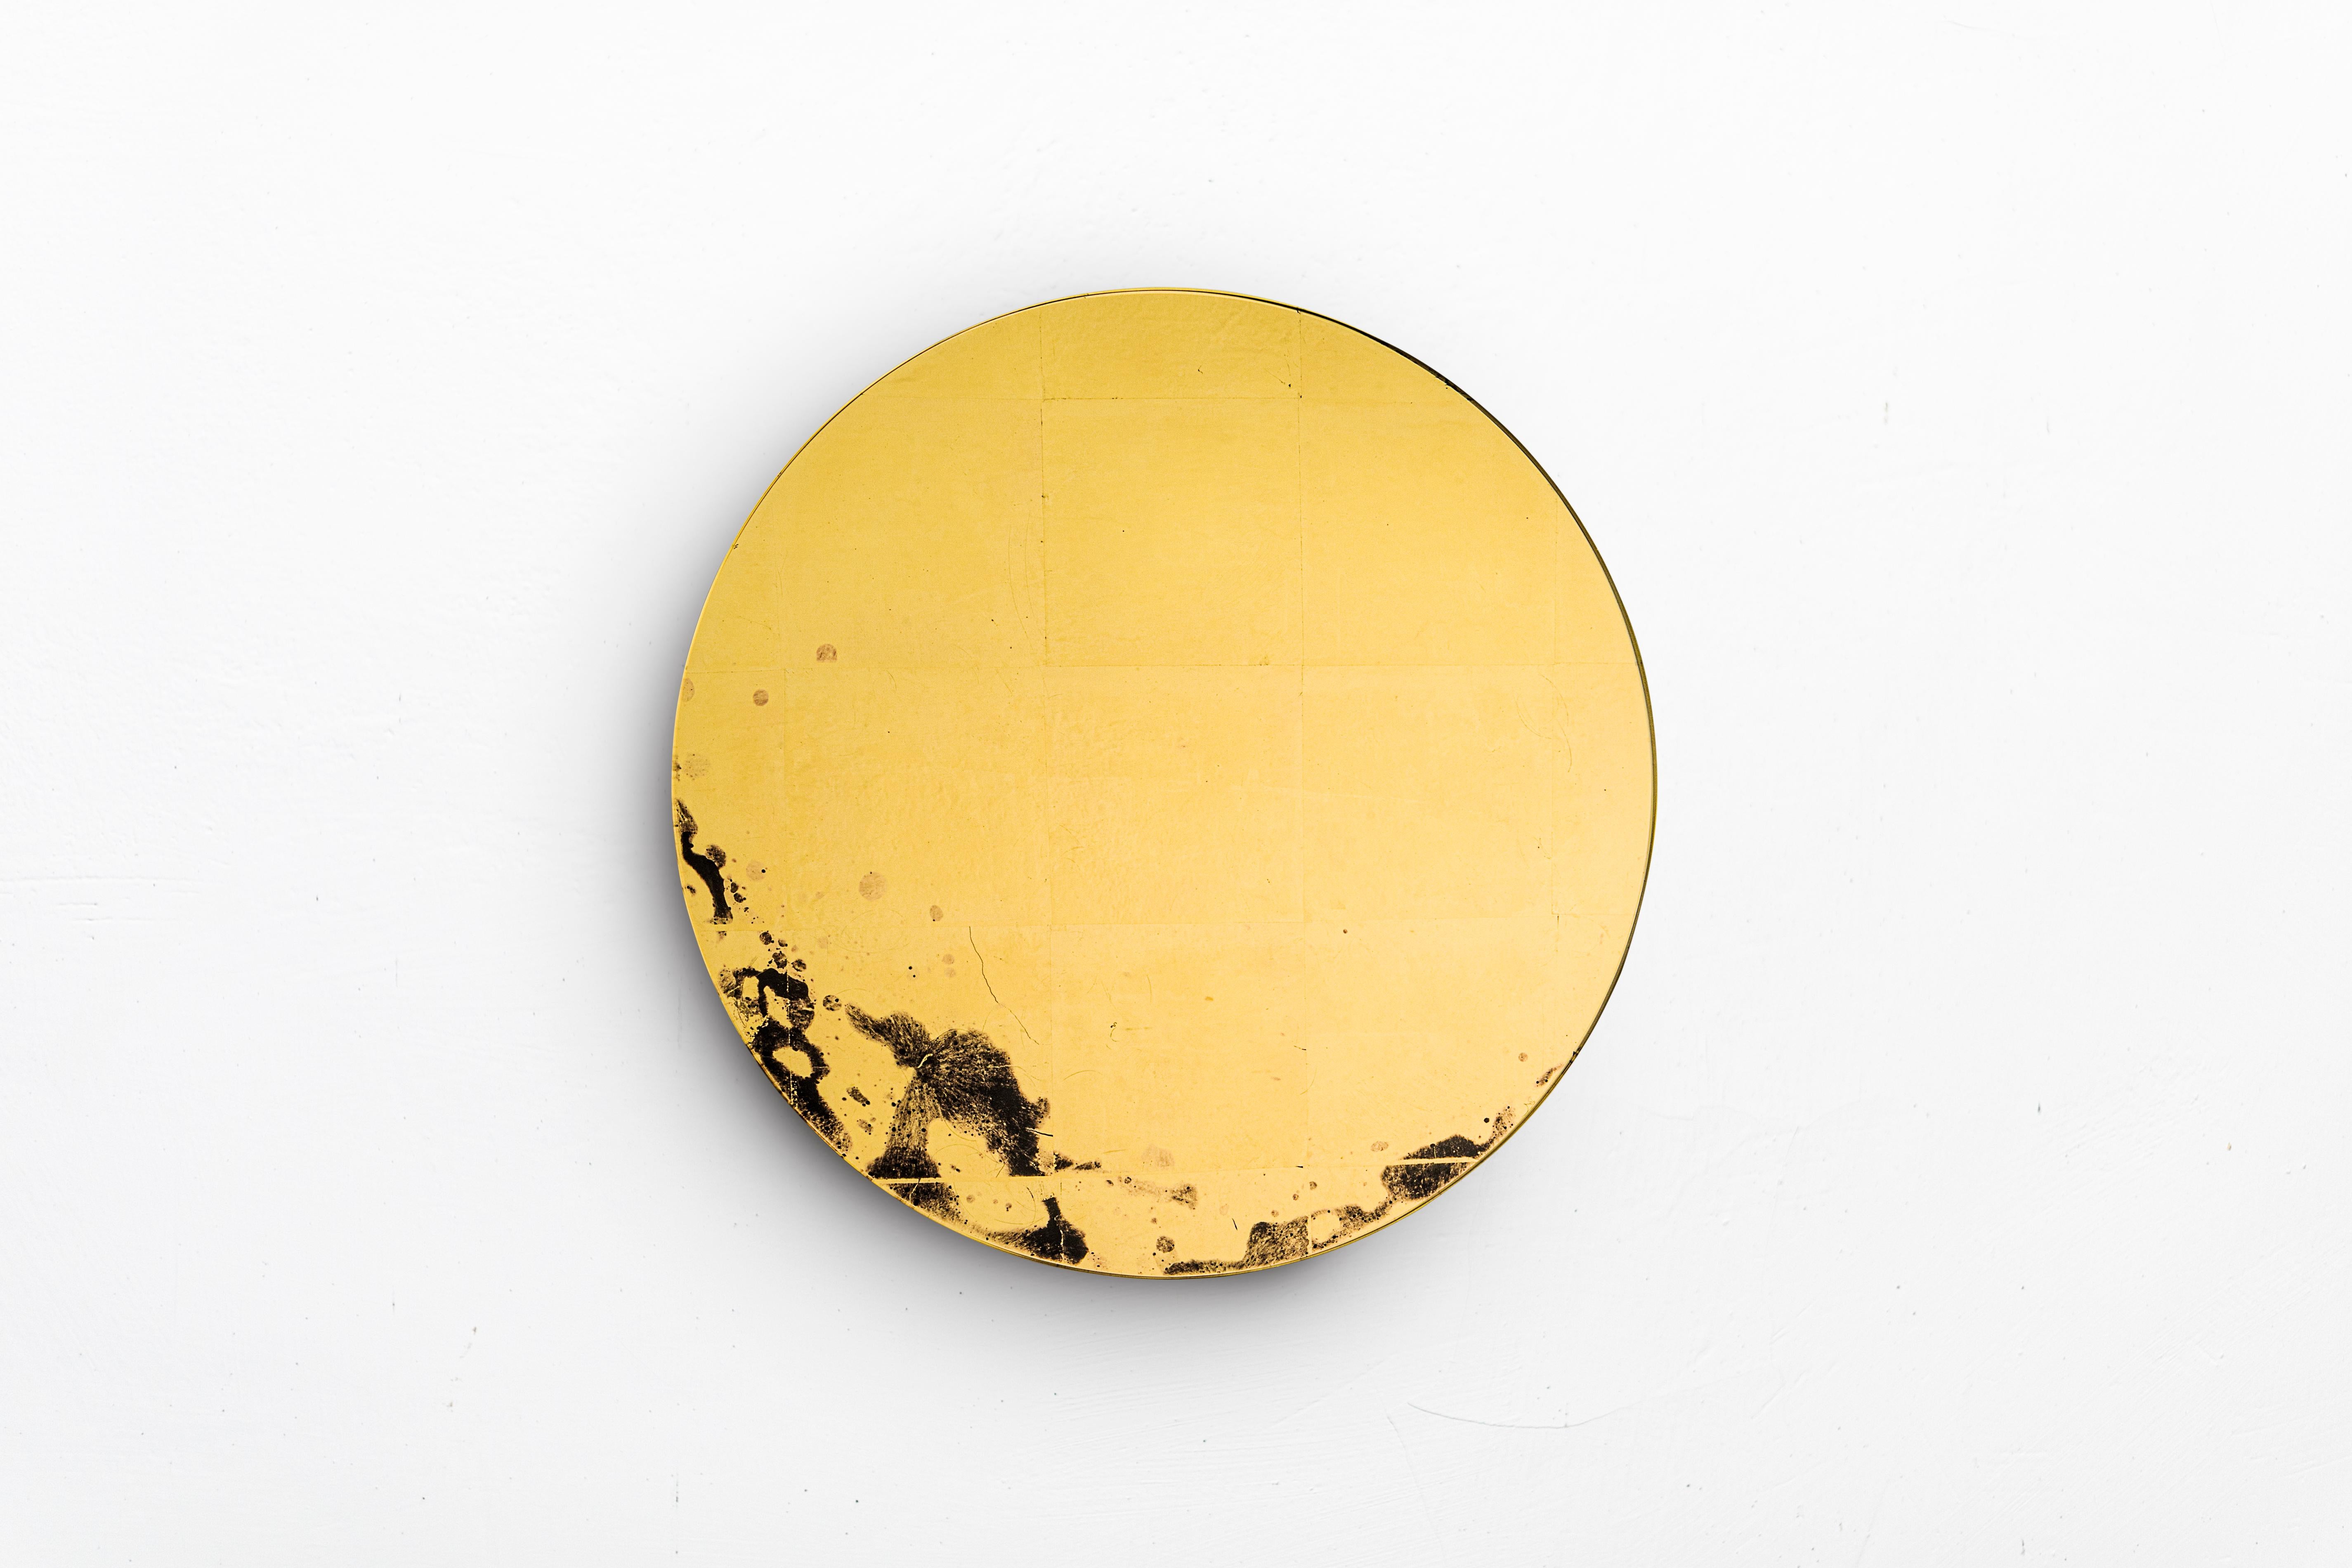 Gold Orb mirror by Nów
Designed by P55 Mirrors
Dimensions: D 30 x H 2.2 cm
Materials: 24 carat gold leaf, Diamant® glass, MDF board.

P55 Mirrors, Beata Ludwin and Lukasz Wolek. Designer artisan mirror workshop. In operation since 2020 in